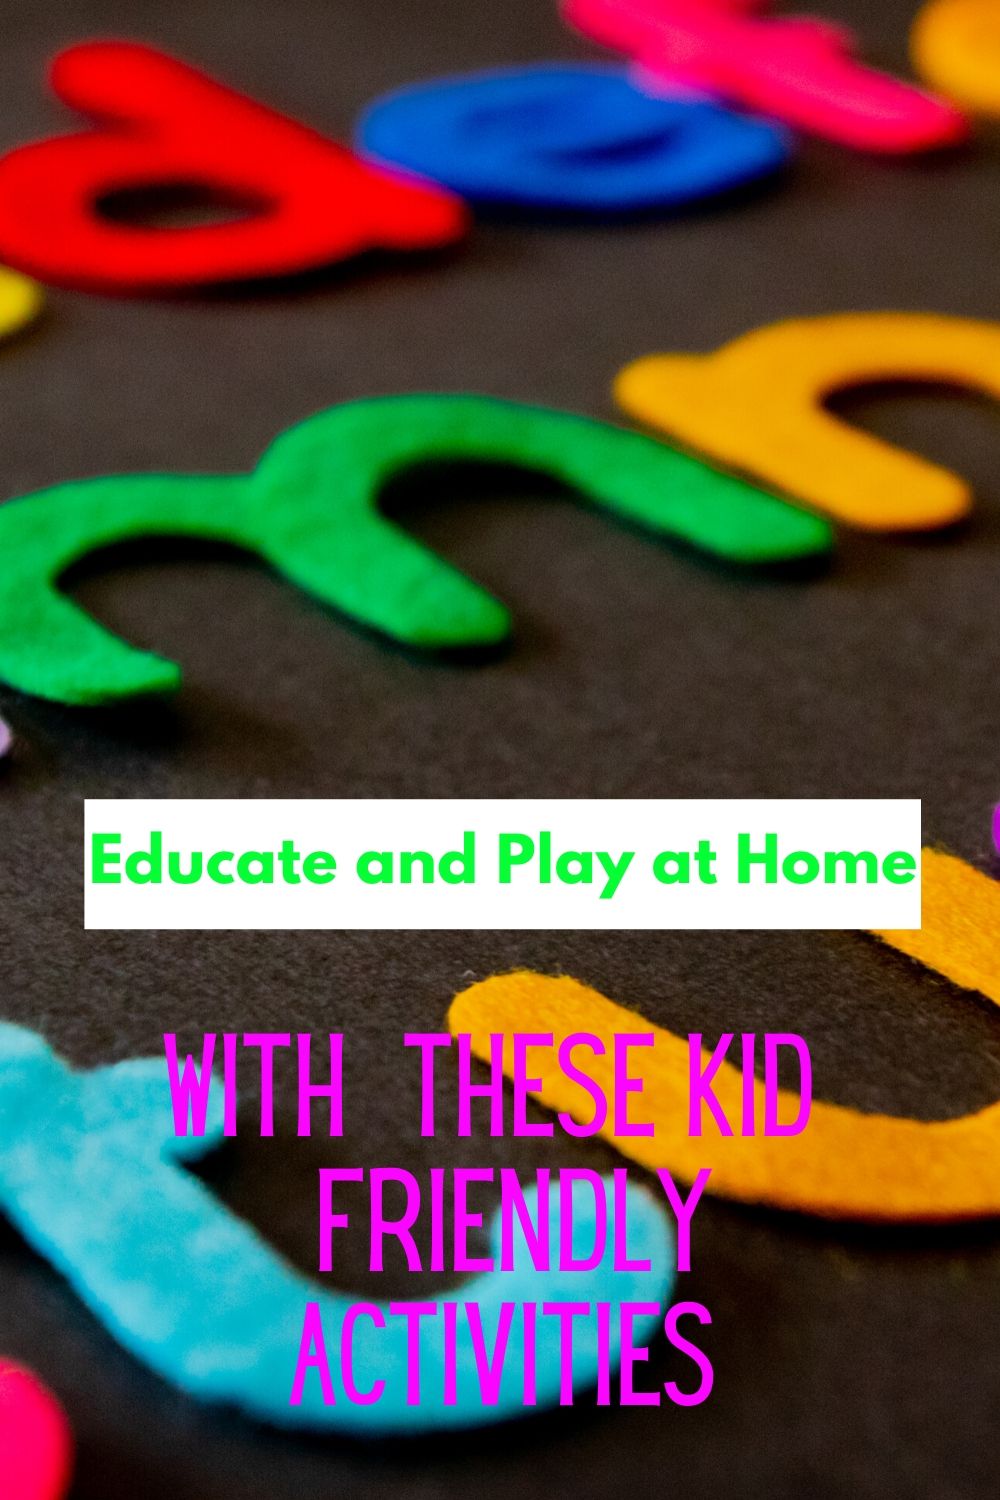 AT Home with the kids activities